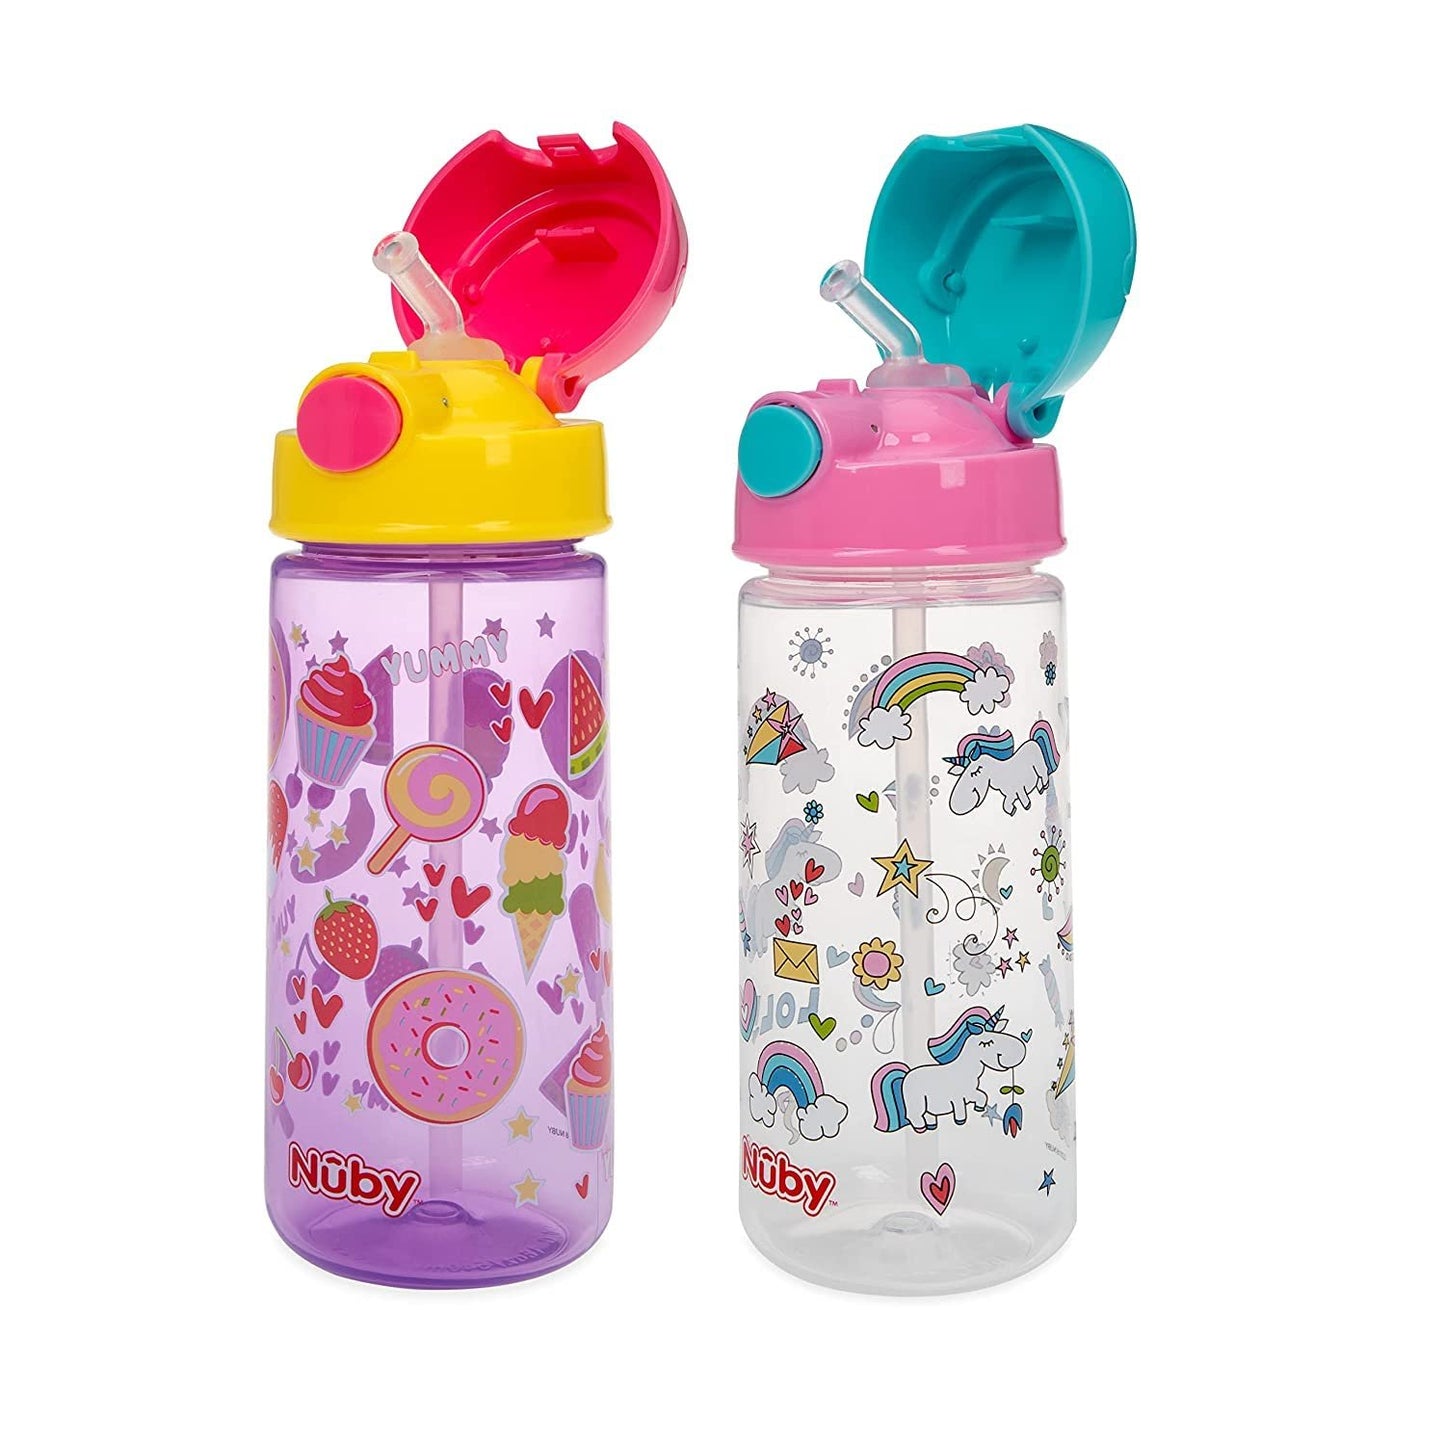 2-Pack Nuby Kid’s Printed Flip-it Active Water Bottle with Push Button Cap and Soft Straw - 18oz / 540ml, 18+ Months, 2-Pack